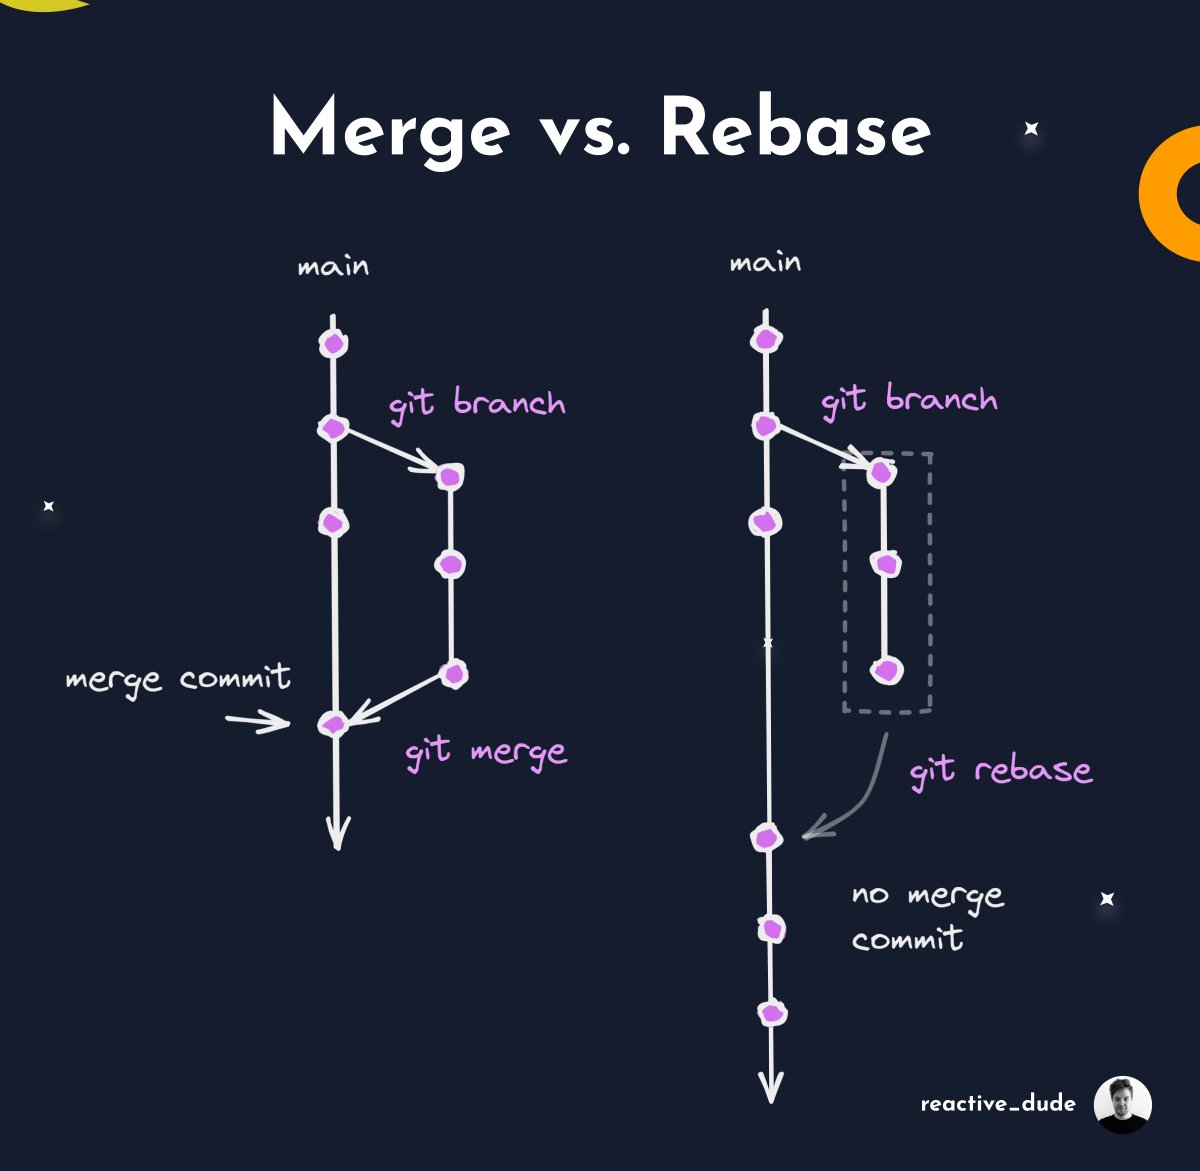 Git Merge vs. Rebase - both serve the purpose of integrating one branch into another - merge creates a merge commit with all changes (easy & safe to use) - rebase moves all commits on the tip of the other branch (good to keep git history linear & clean)